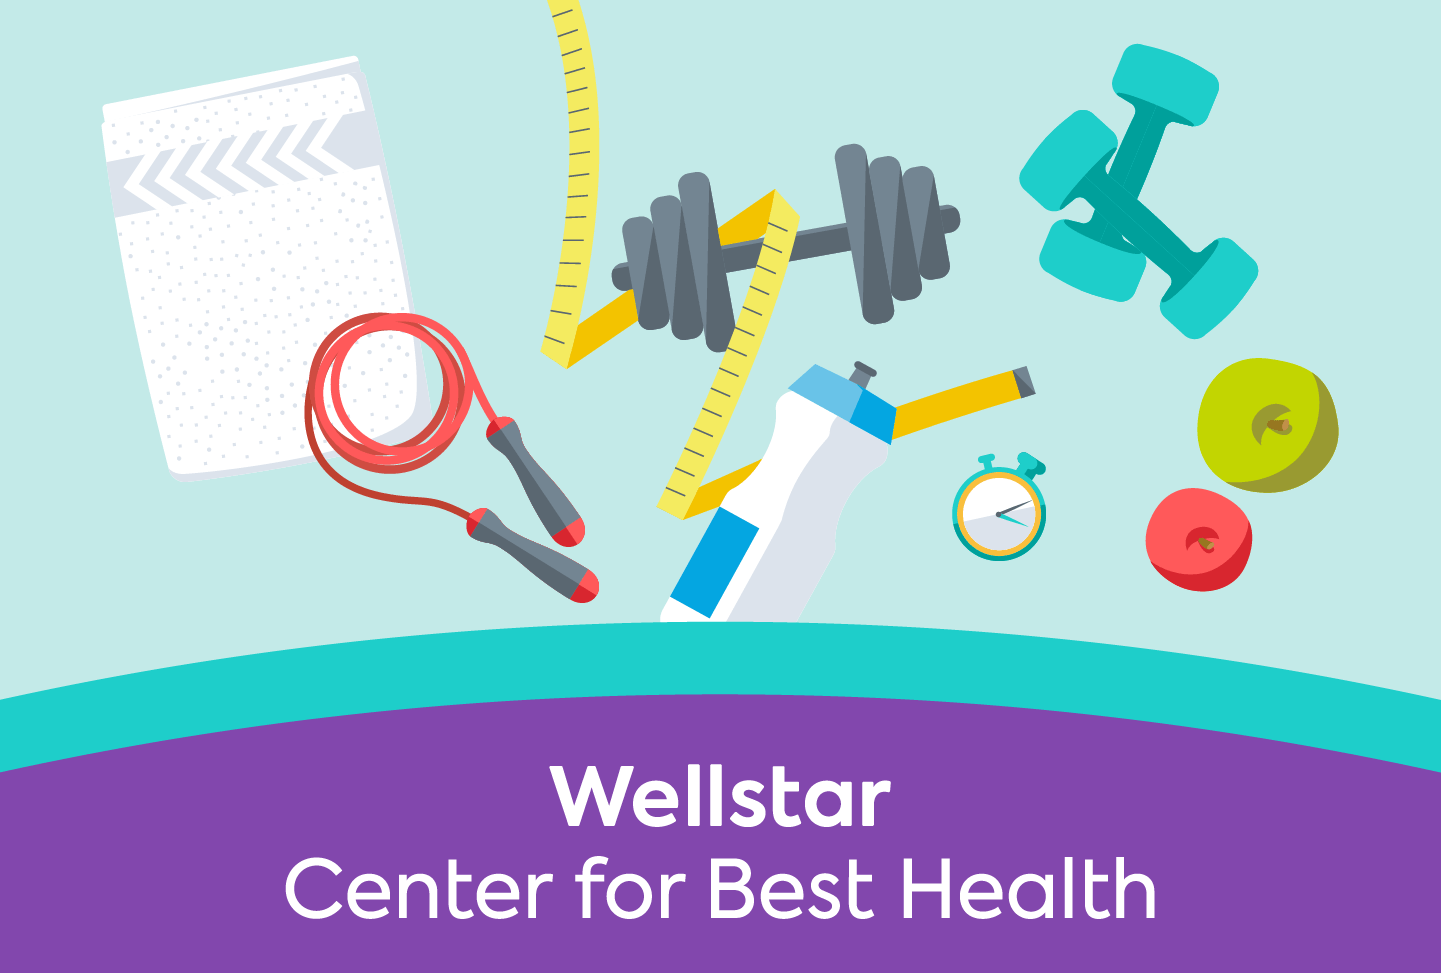 Illustration of several weight management tools and text "Wellstar Center for Best Health."